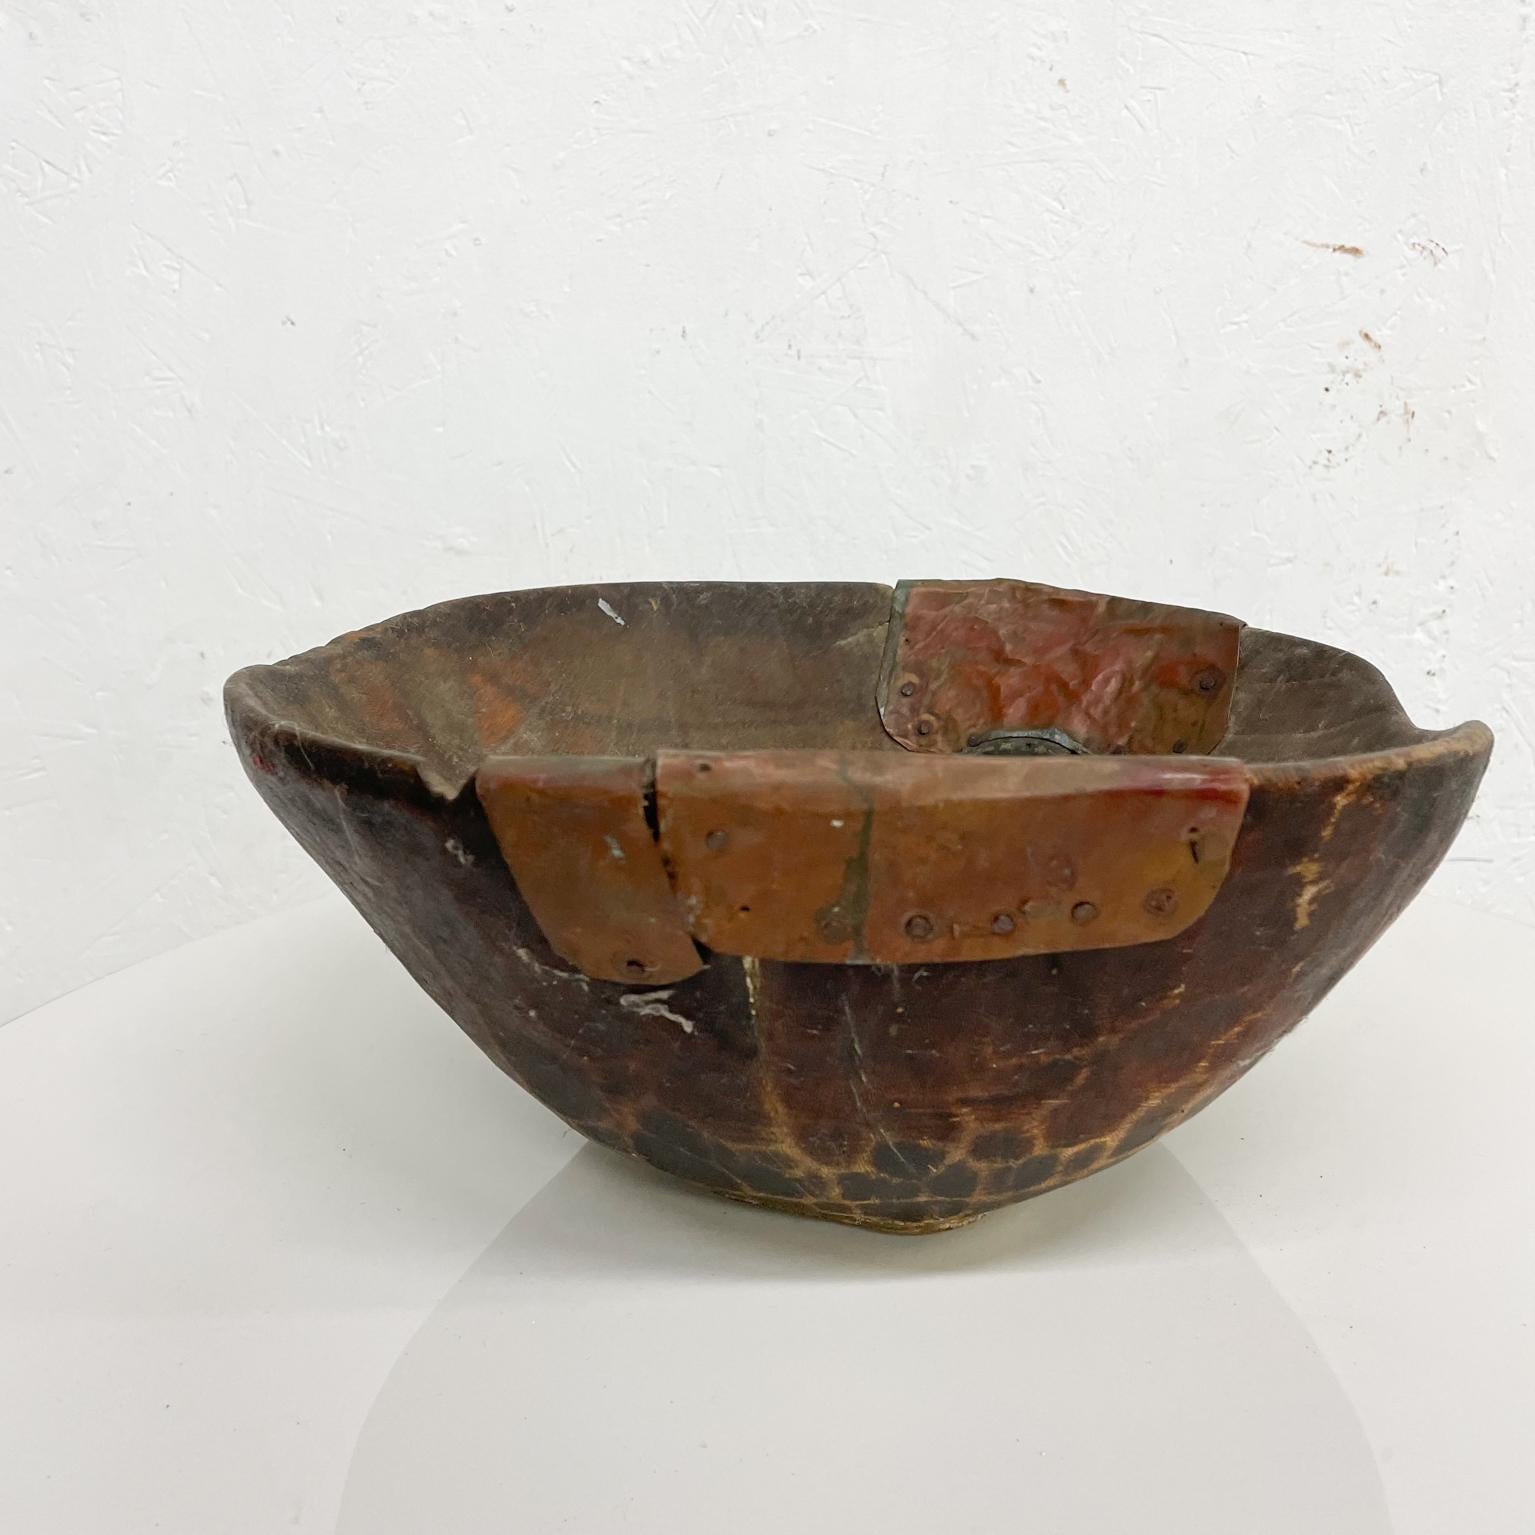 Industrial Handmade Sculptural Antique Rustic Wood Bowl with Decorative Copper